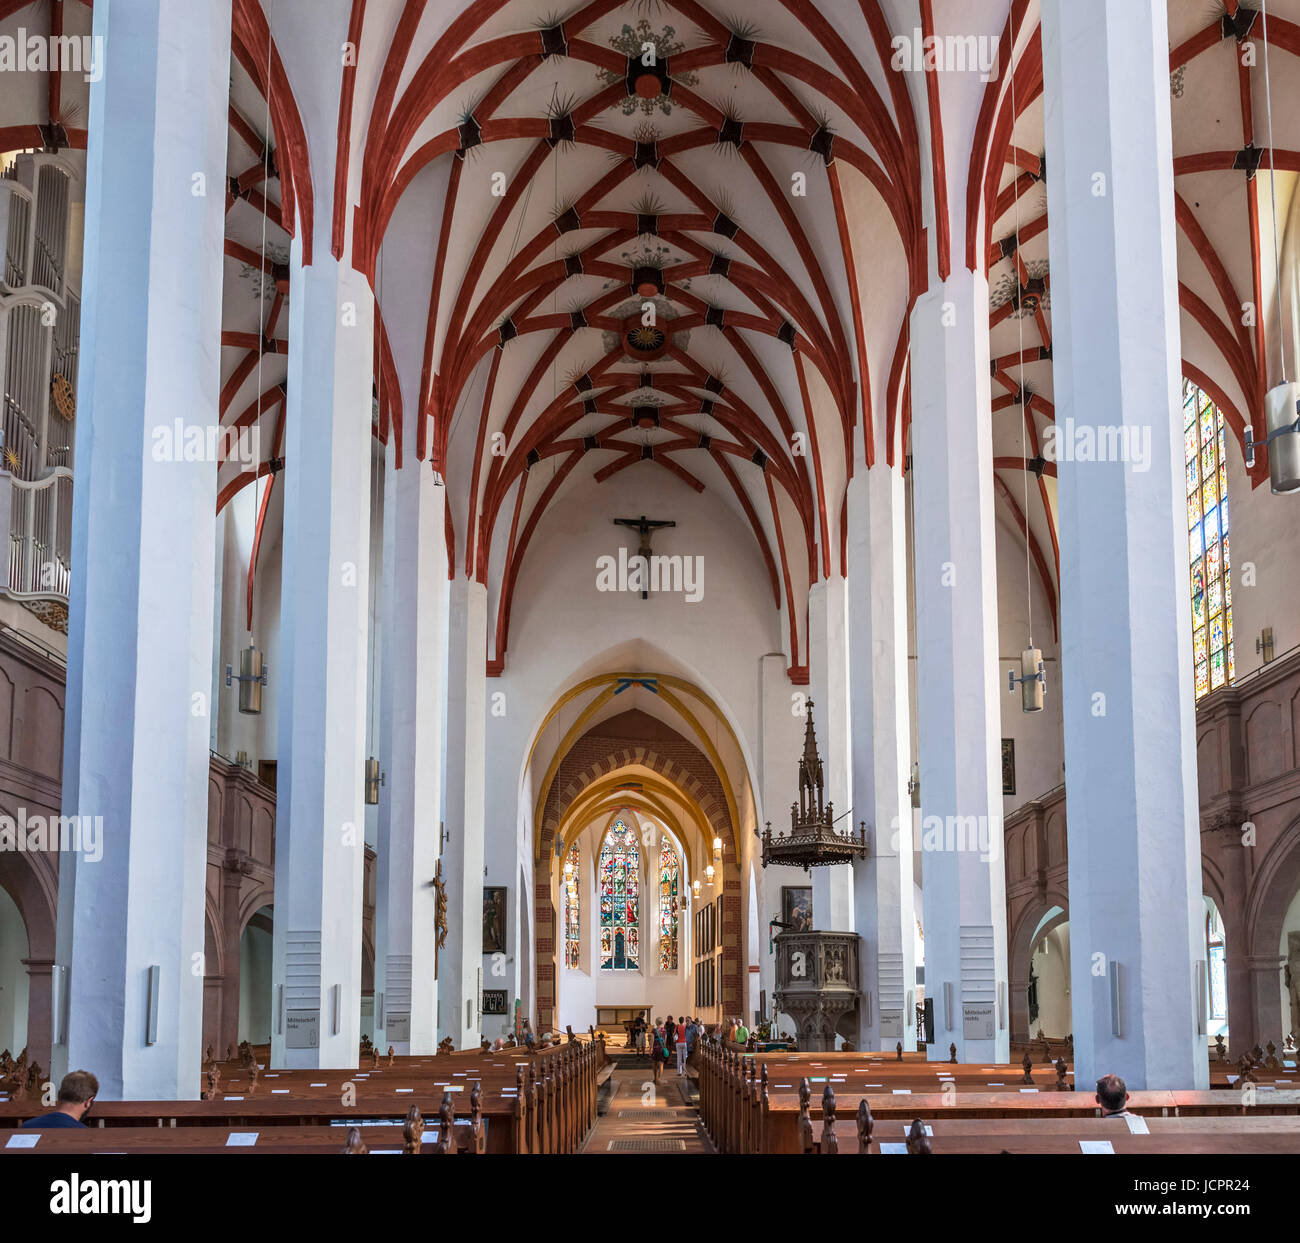 Nave of Thomaskirche (St Thomas Church) which houses the grave of JS Bach, Leipzig, Saxony, Germany. Bach served as cantor of the church for the last  Stock Photo